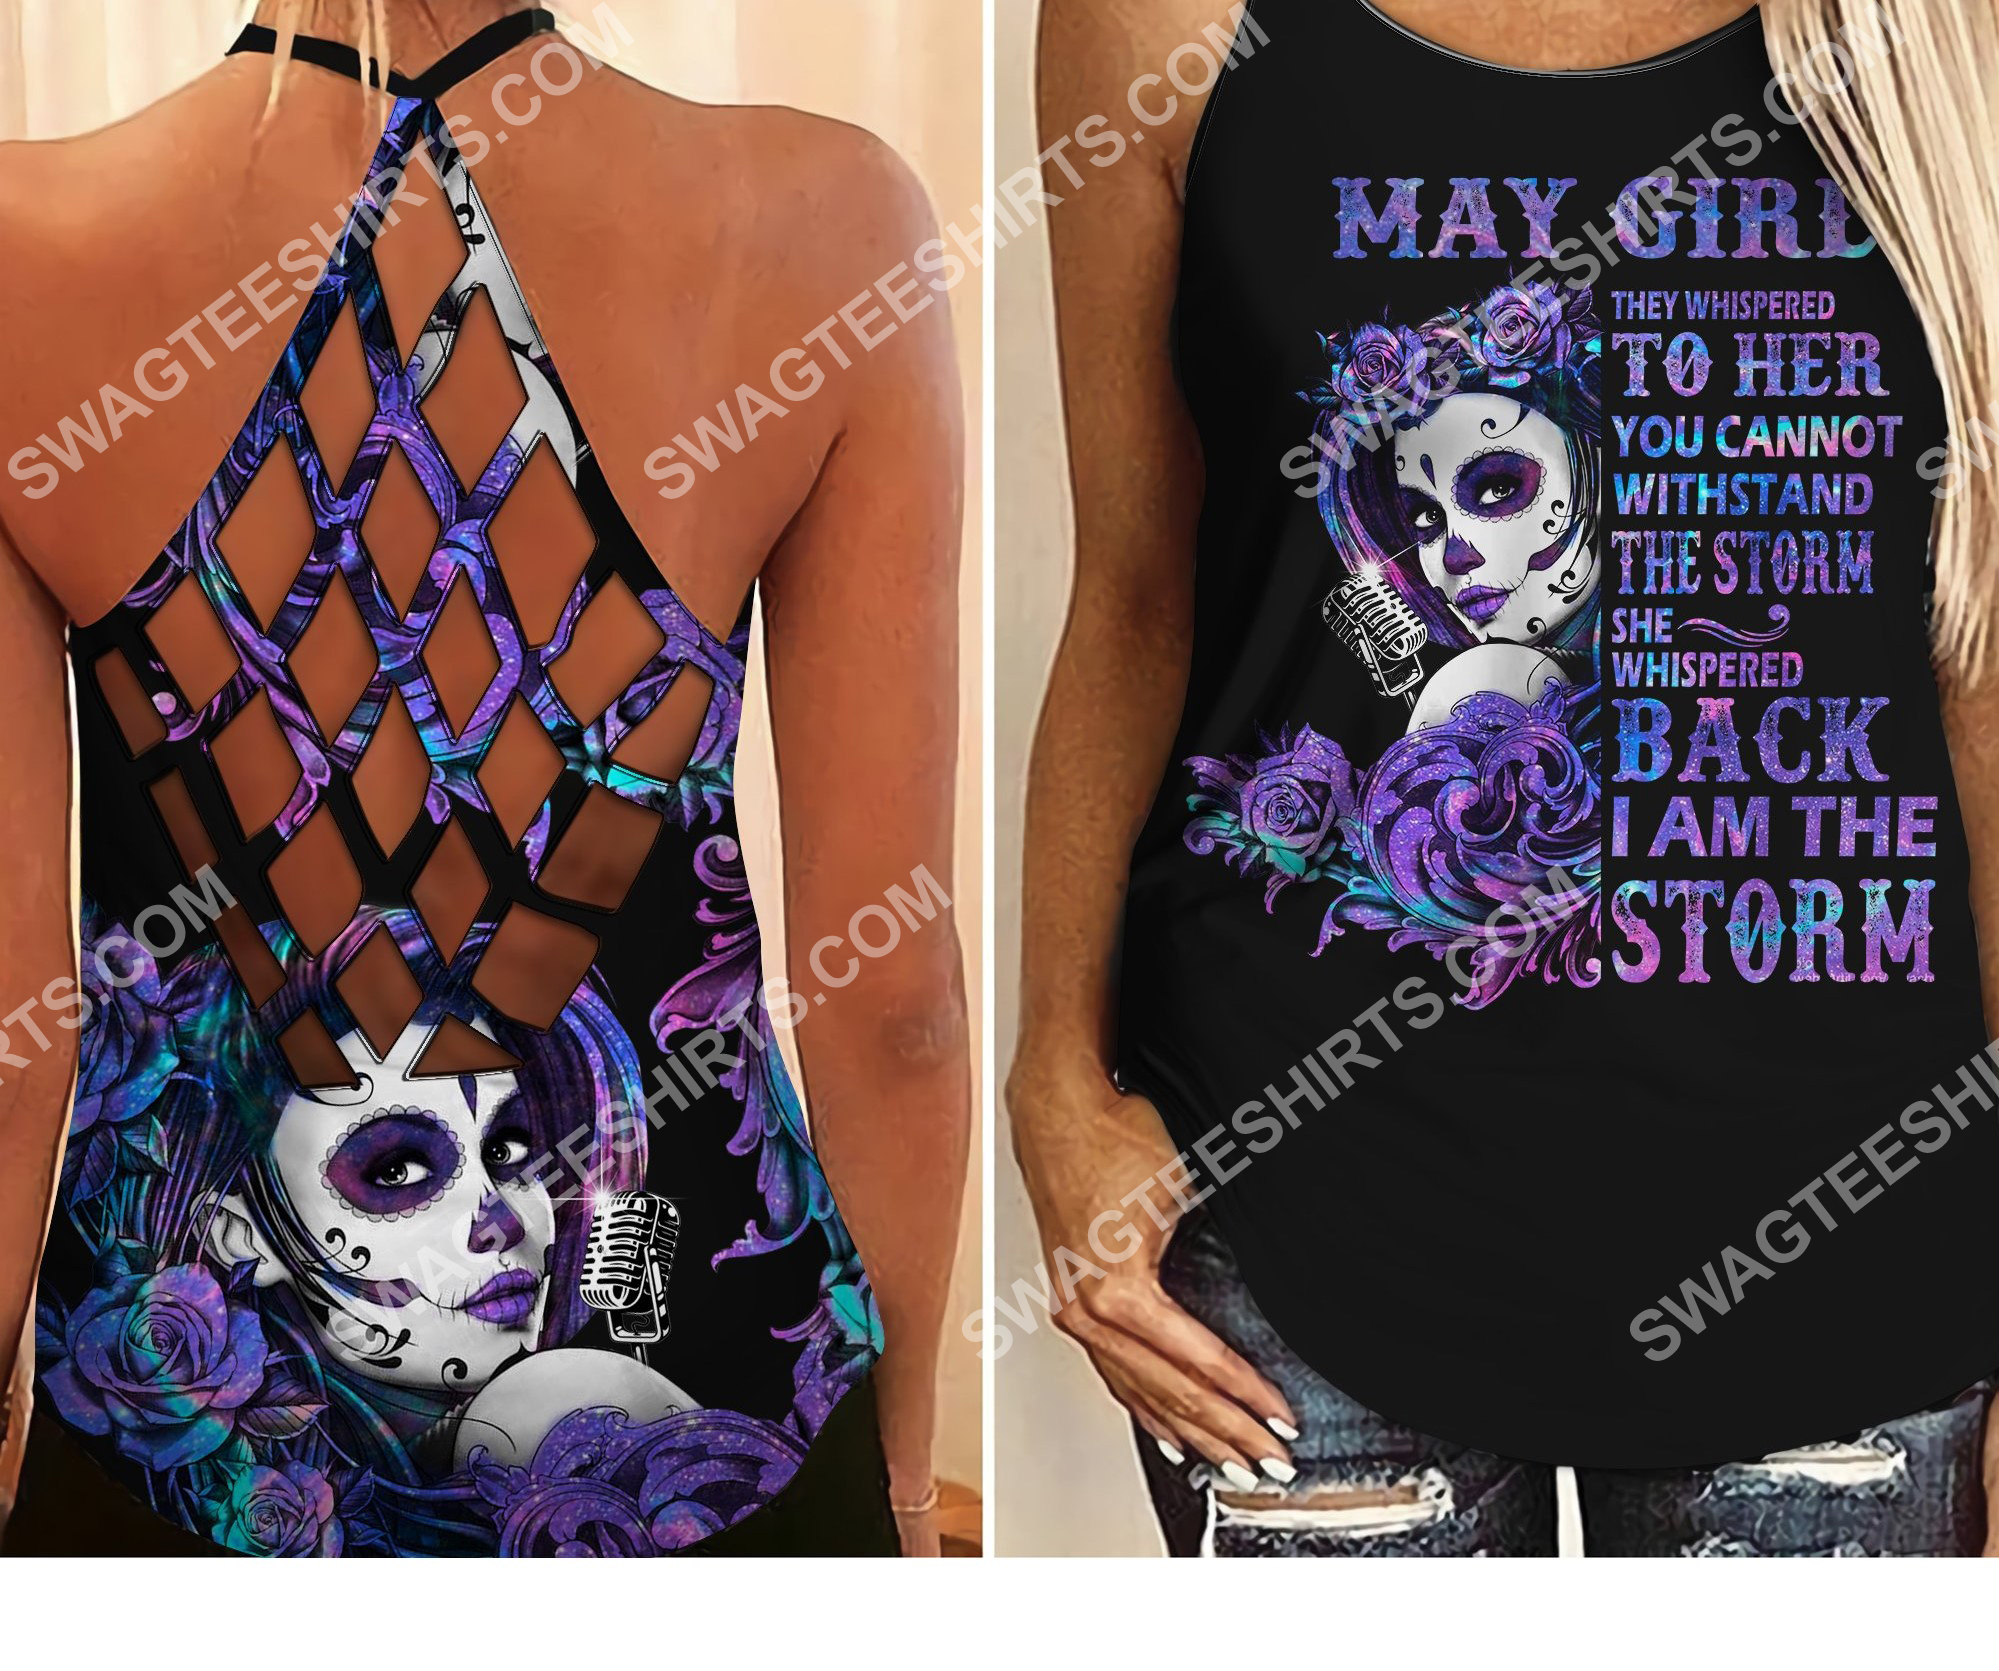 they whispered to her you cannot withstand the storm may girl criss-cross tank top 2 - Copy